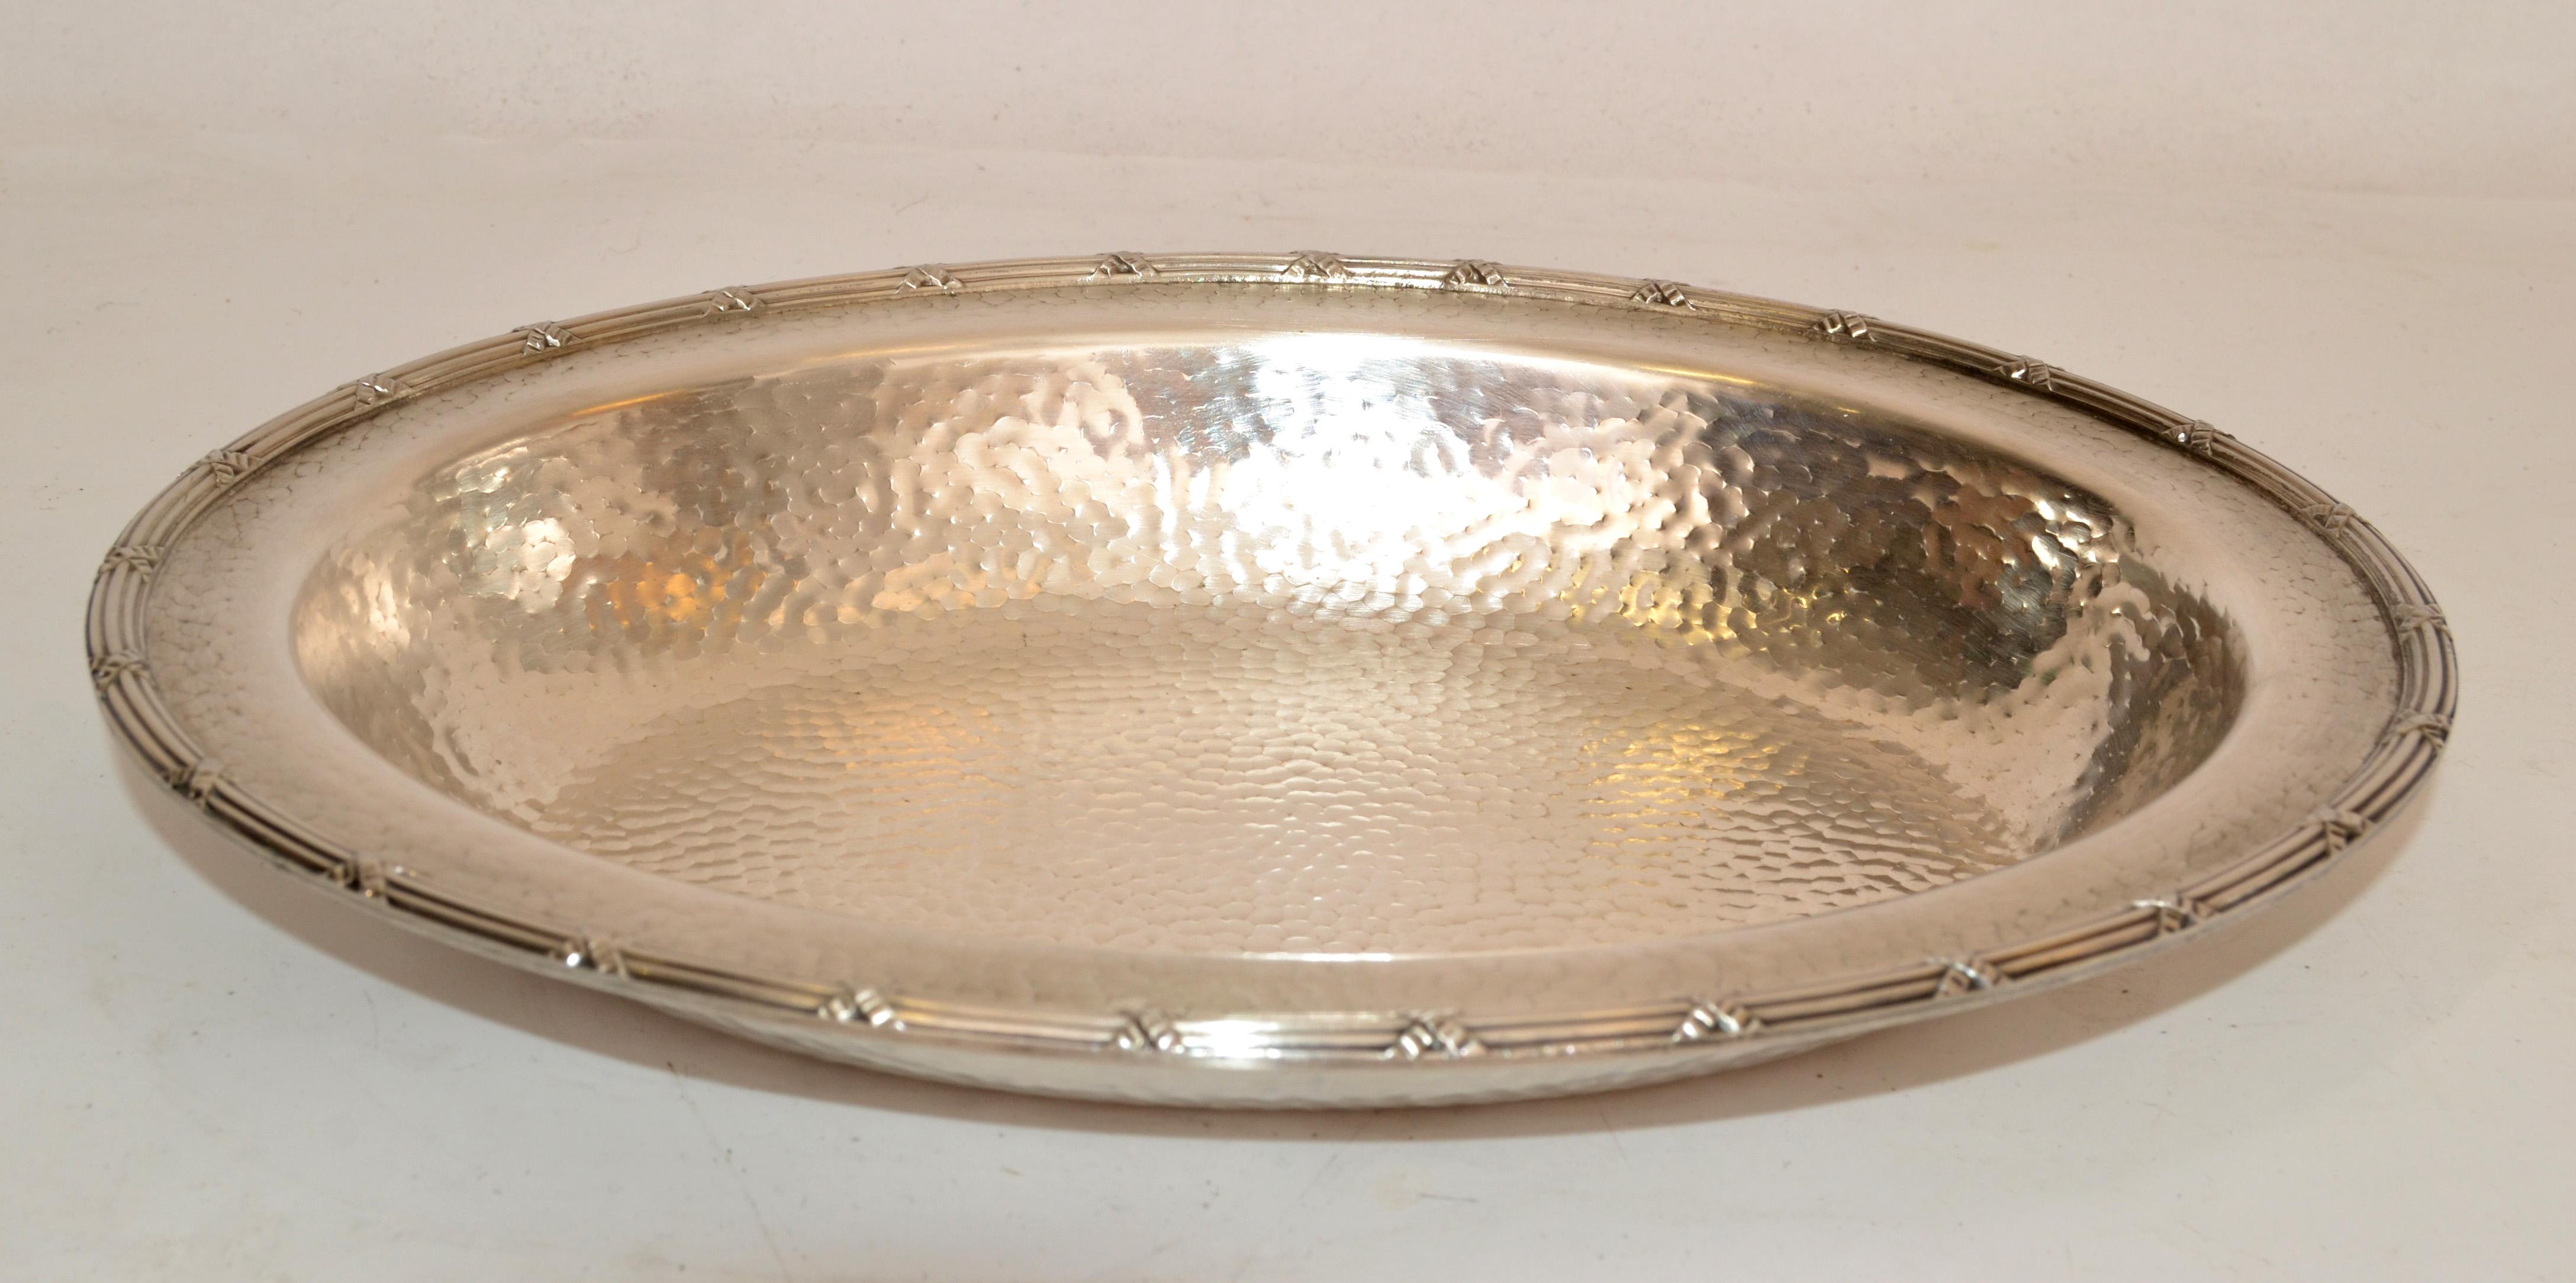 1960s Art Deco hand-hammered oval silver plate detail bowl, centerpiece.
Silver Markings at the base, EPNS 2245.
Great quality craftsmanship.
Perfect for Your Holiday Gift Collection.